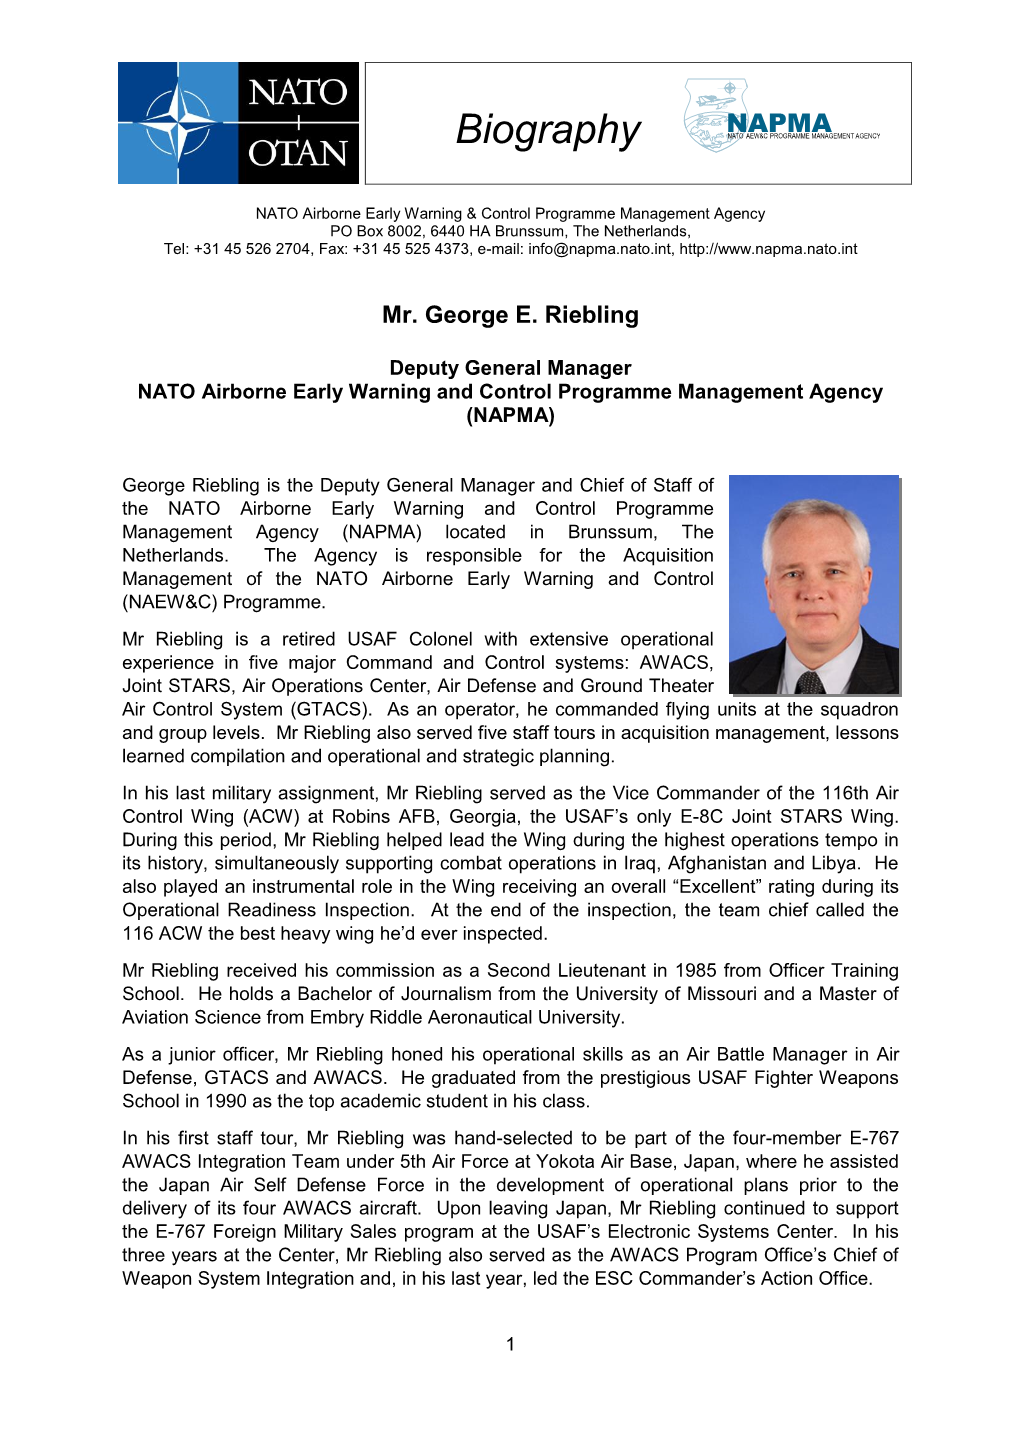 Click Here to View the Biography of Mr. George E. Riebling